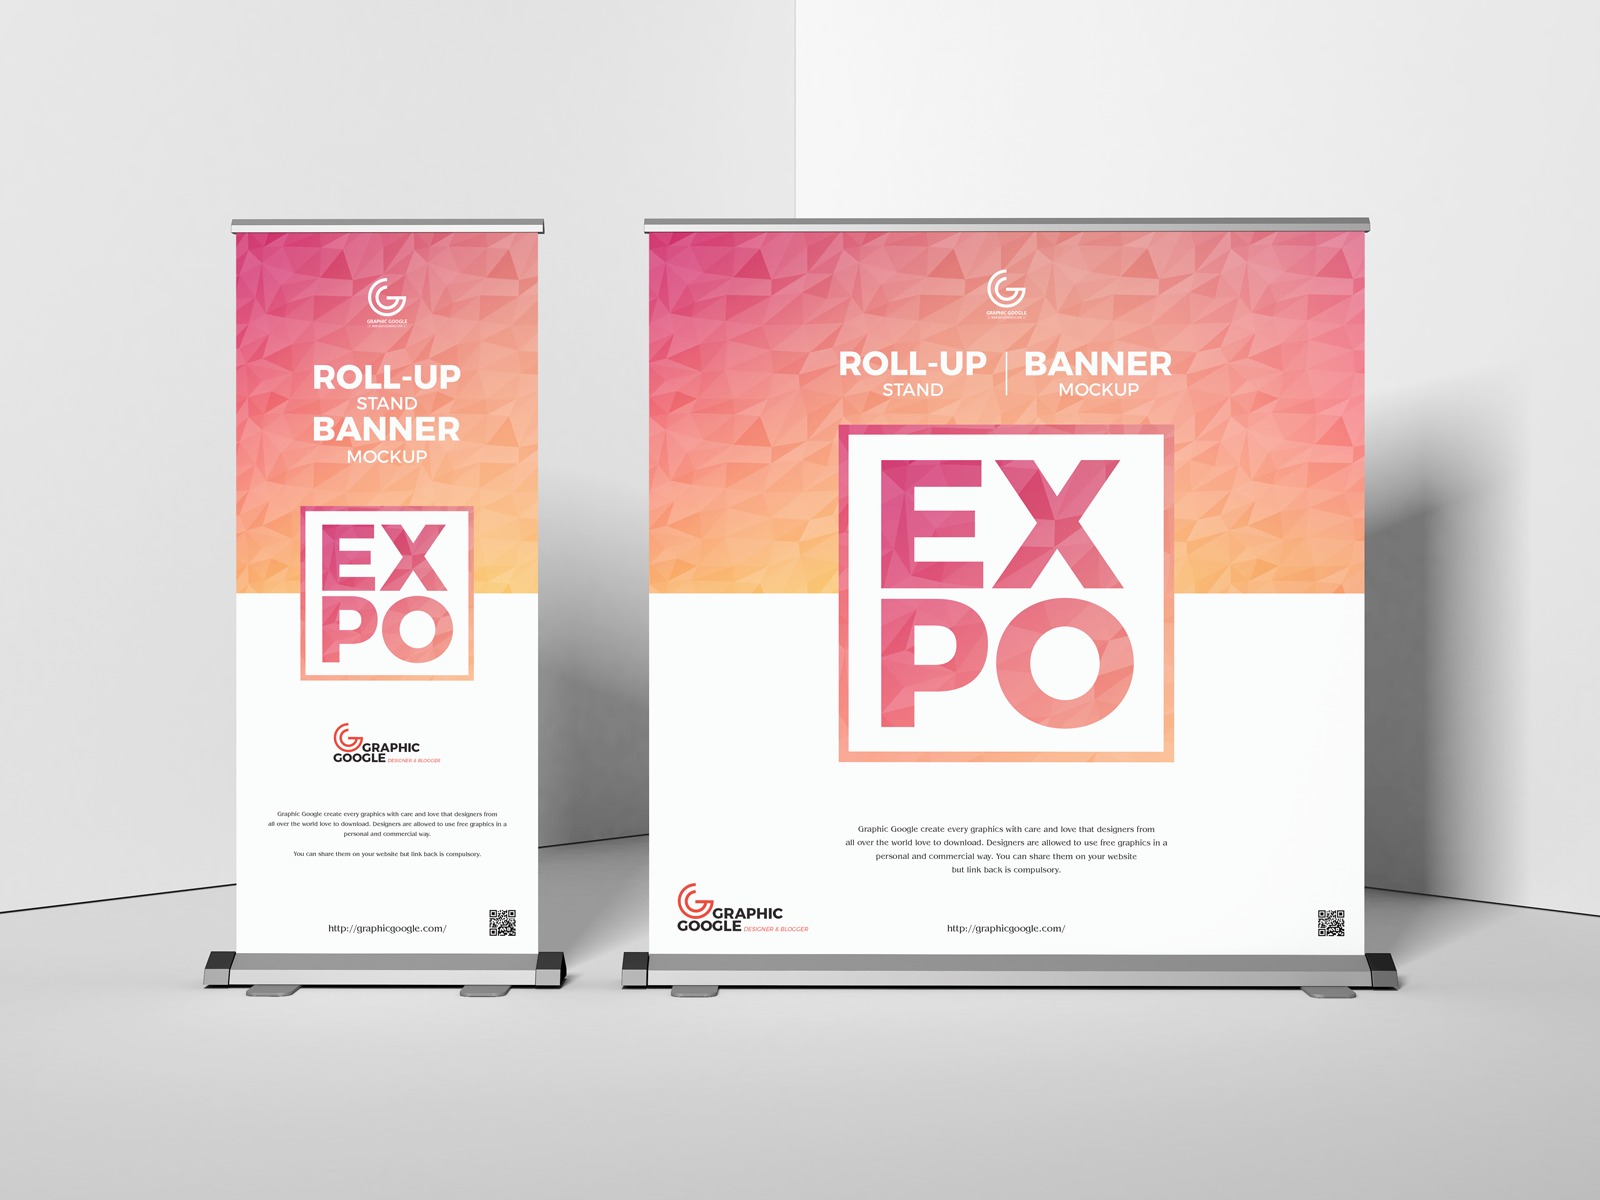 Download Free Expo Roll-Up Stand Banner Mockup by Graphic Google on Dribbble